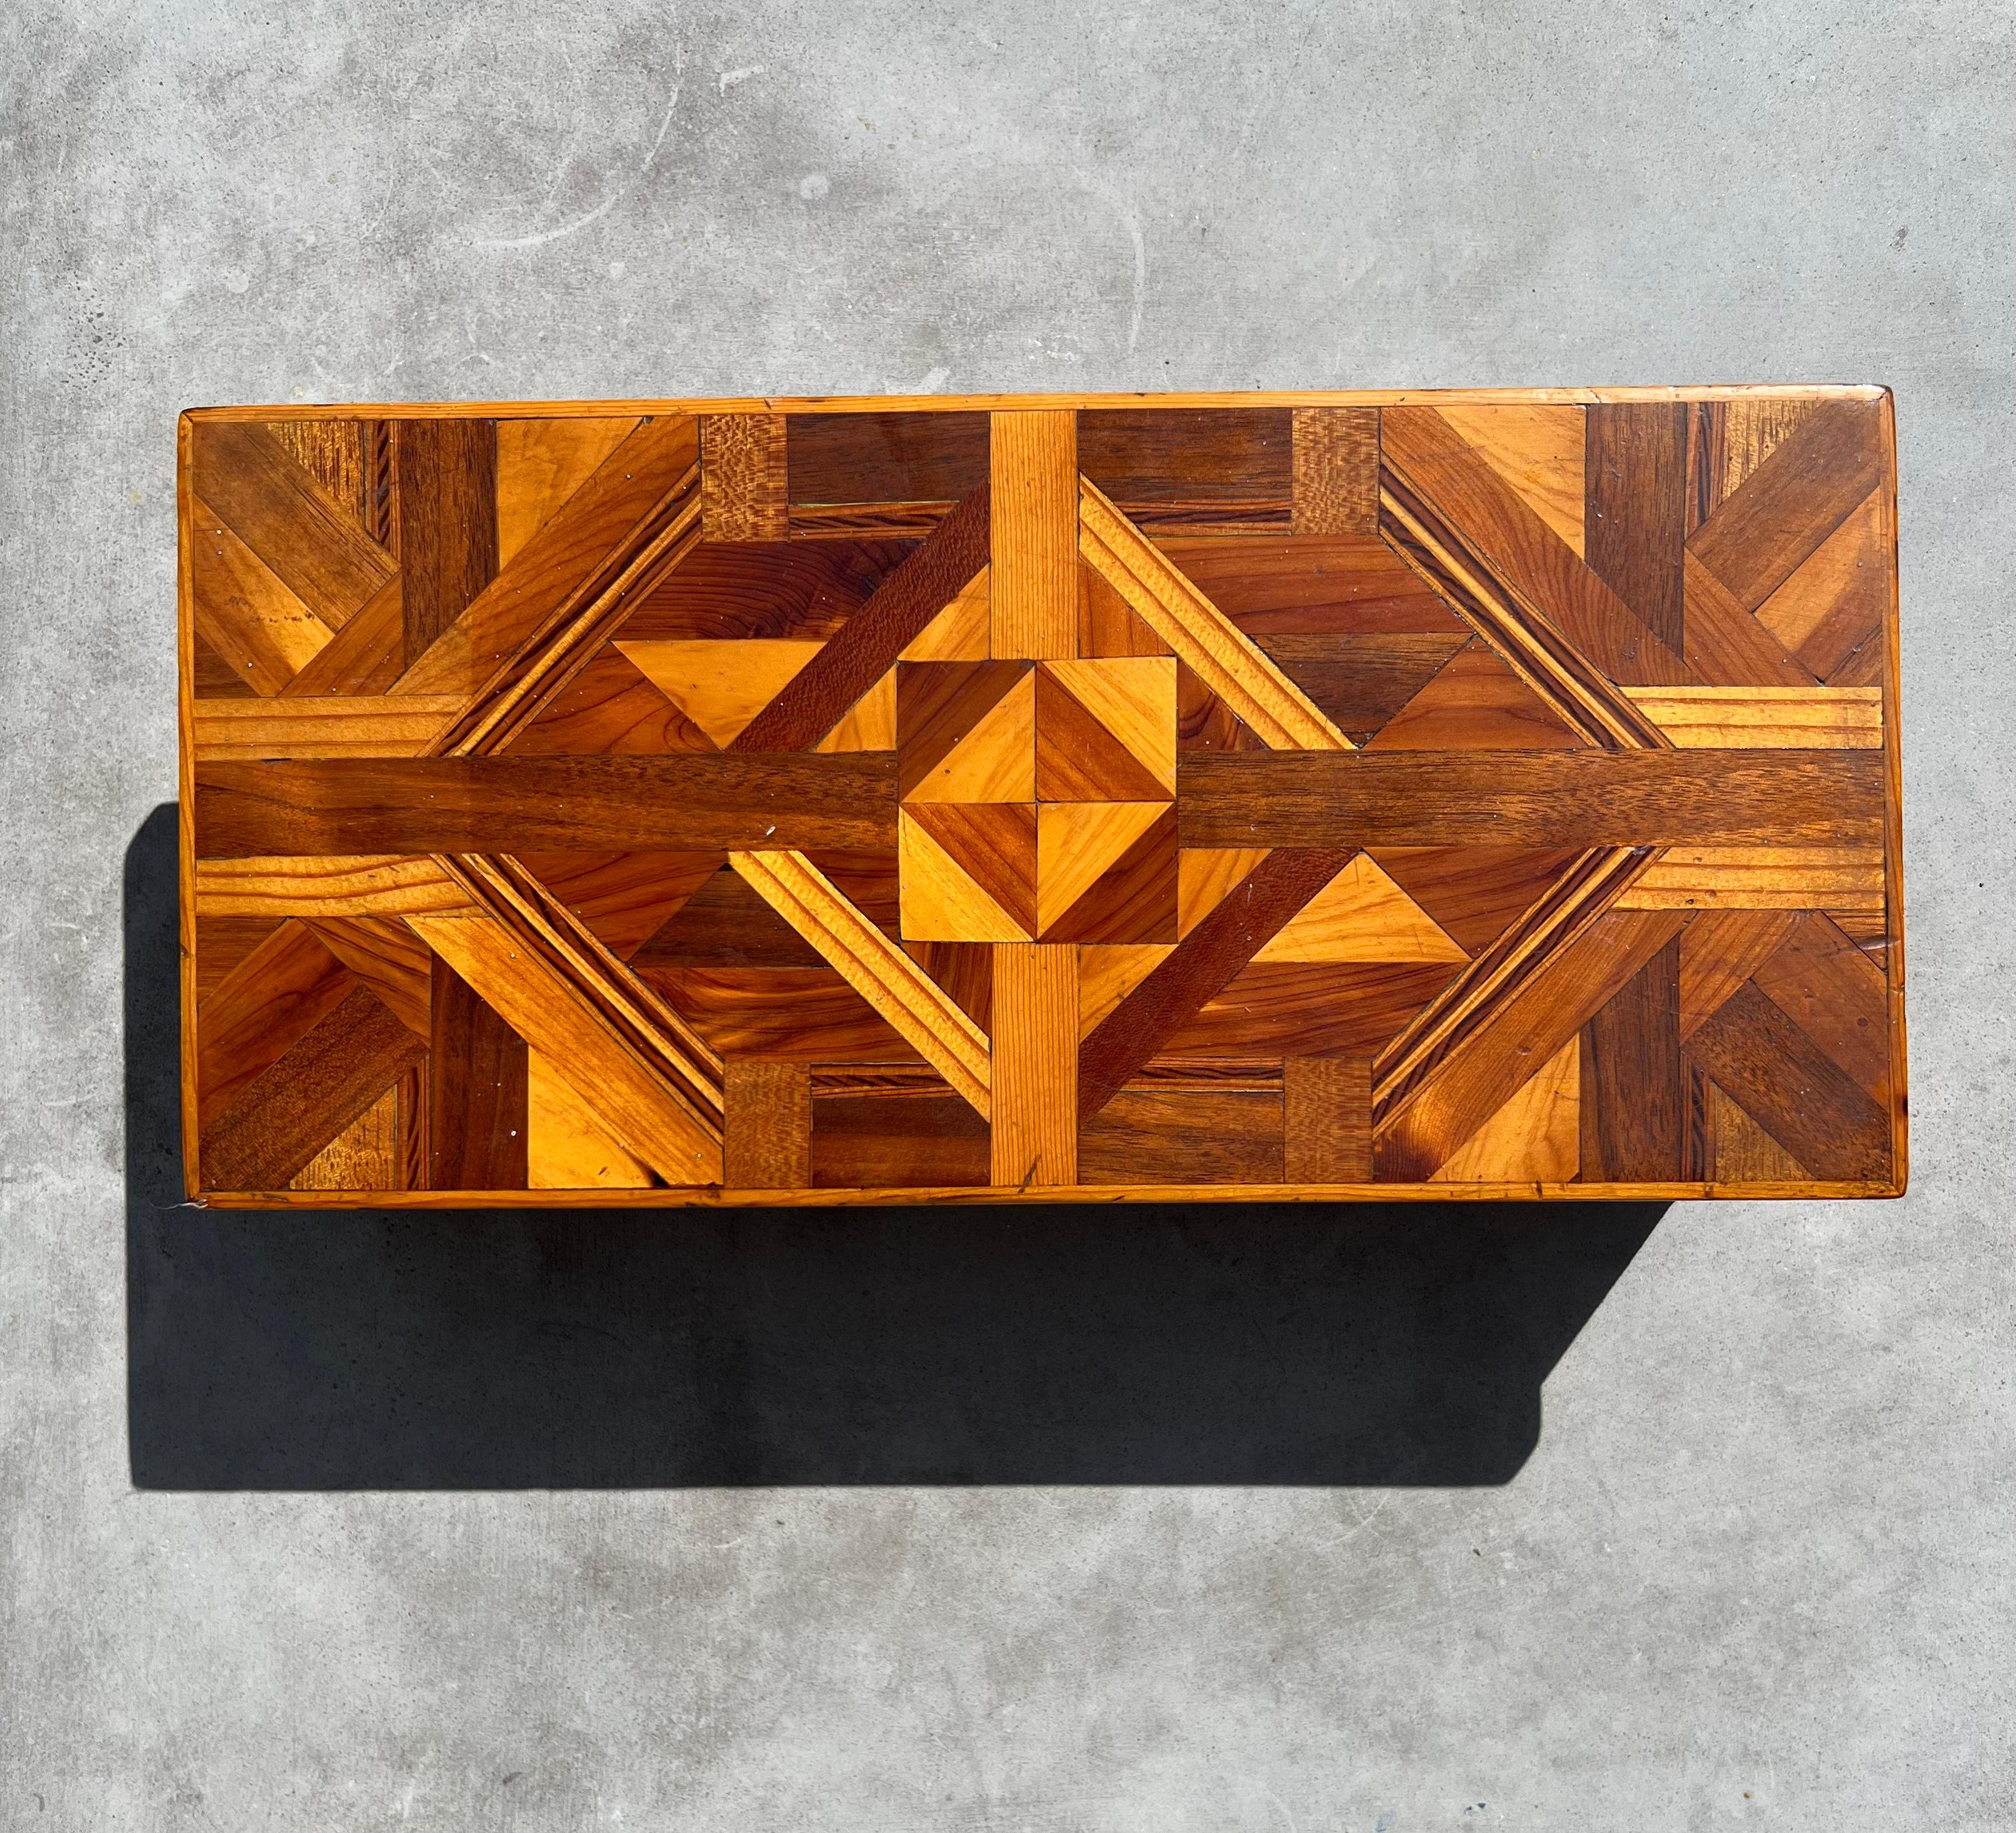 An American craftsman / Art Deco Frank / Lloyd Wright style jewelry box with burl patchwork motif, circa 1930s. Signs of age include minor scuffing and some nicks to the upper inside of lid, but no structural damage. The upper shelf of jewelry box